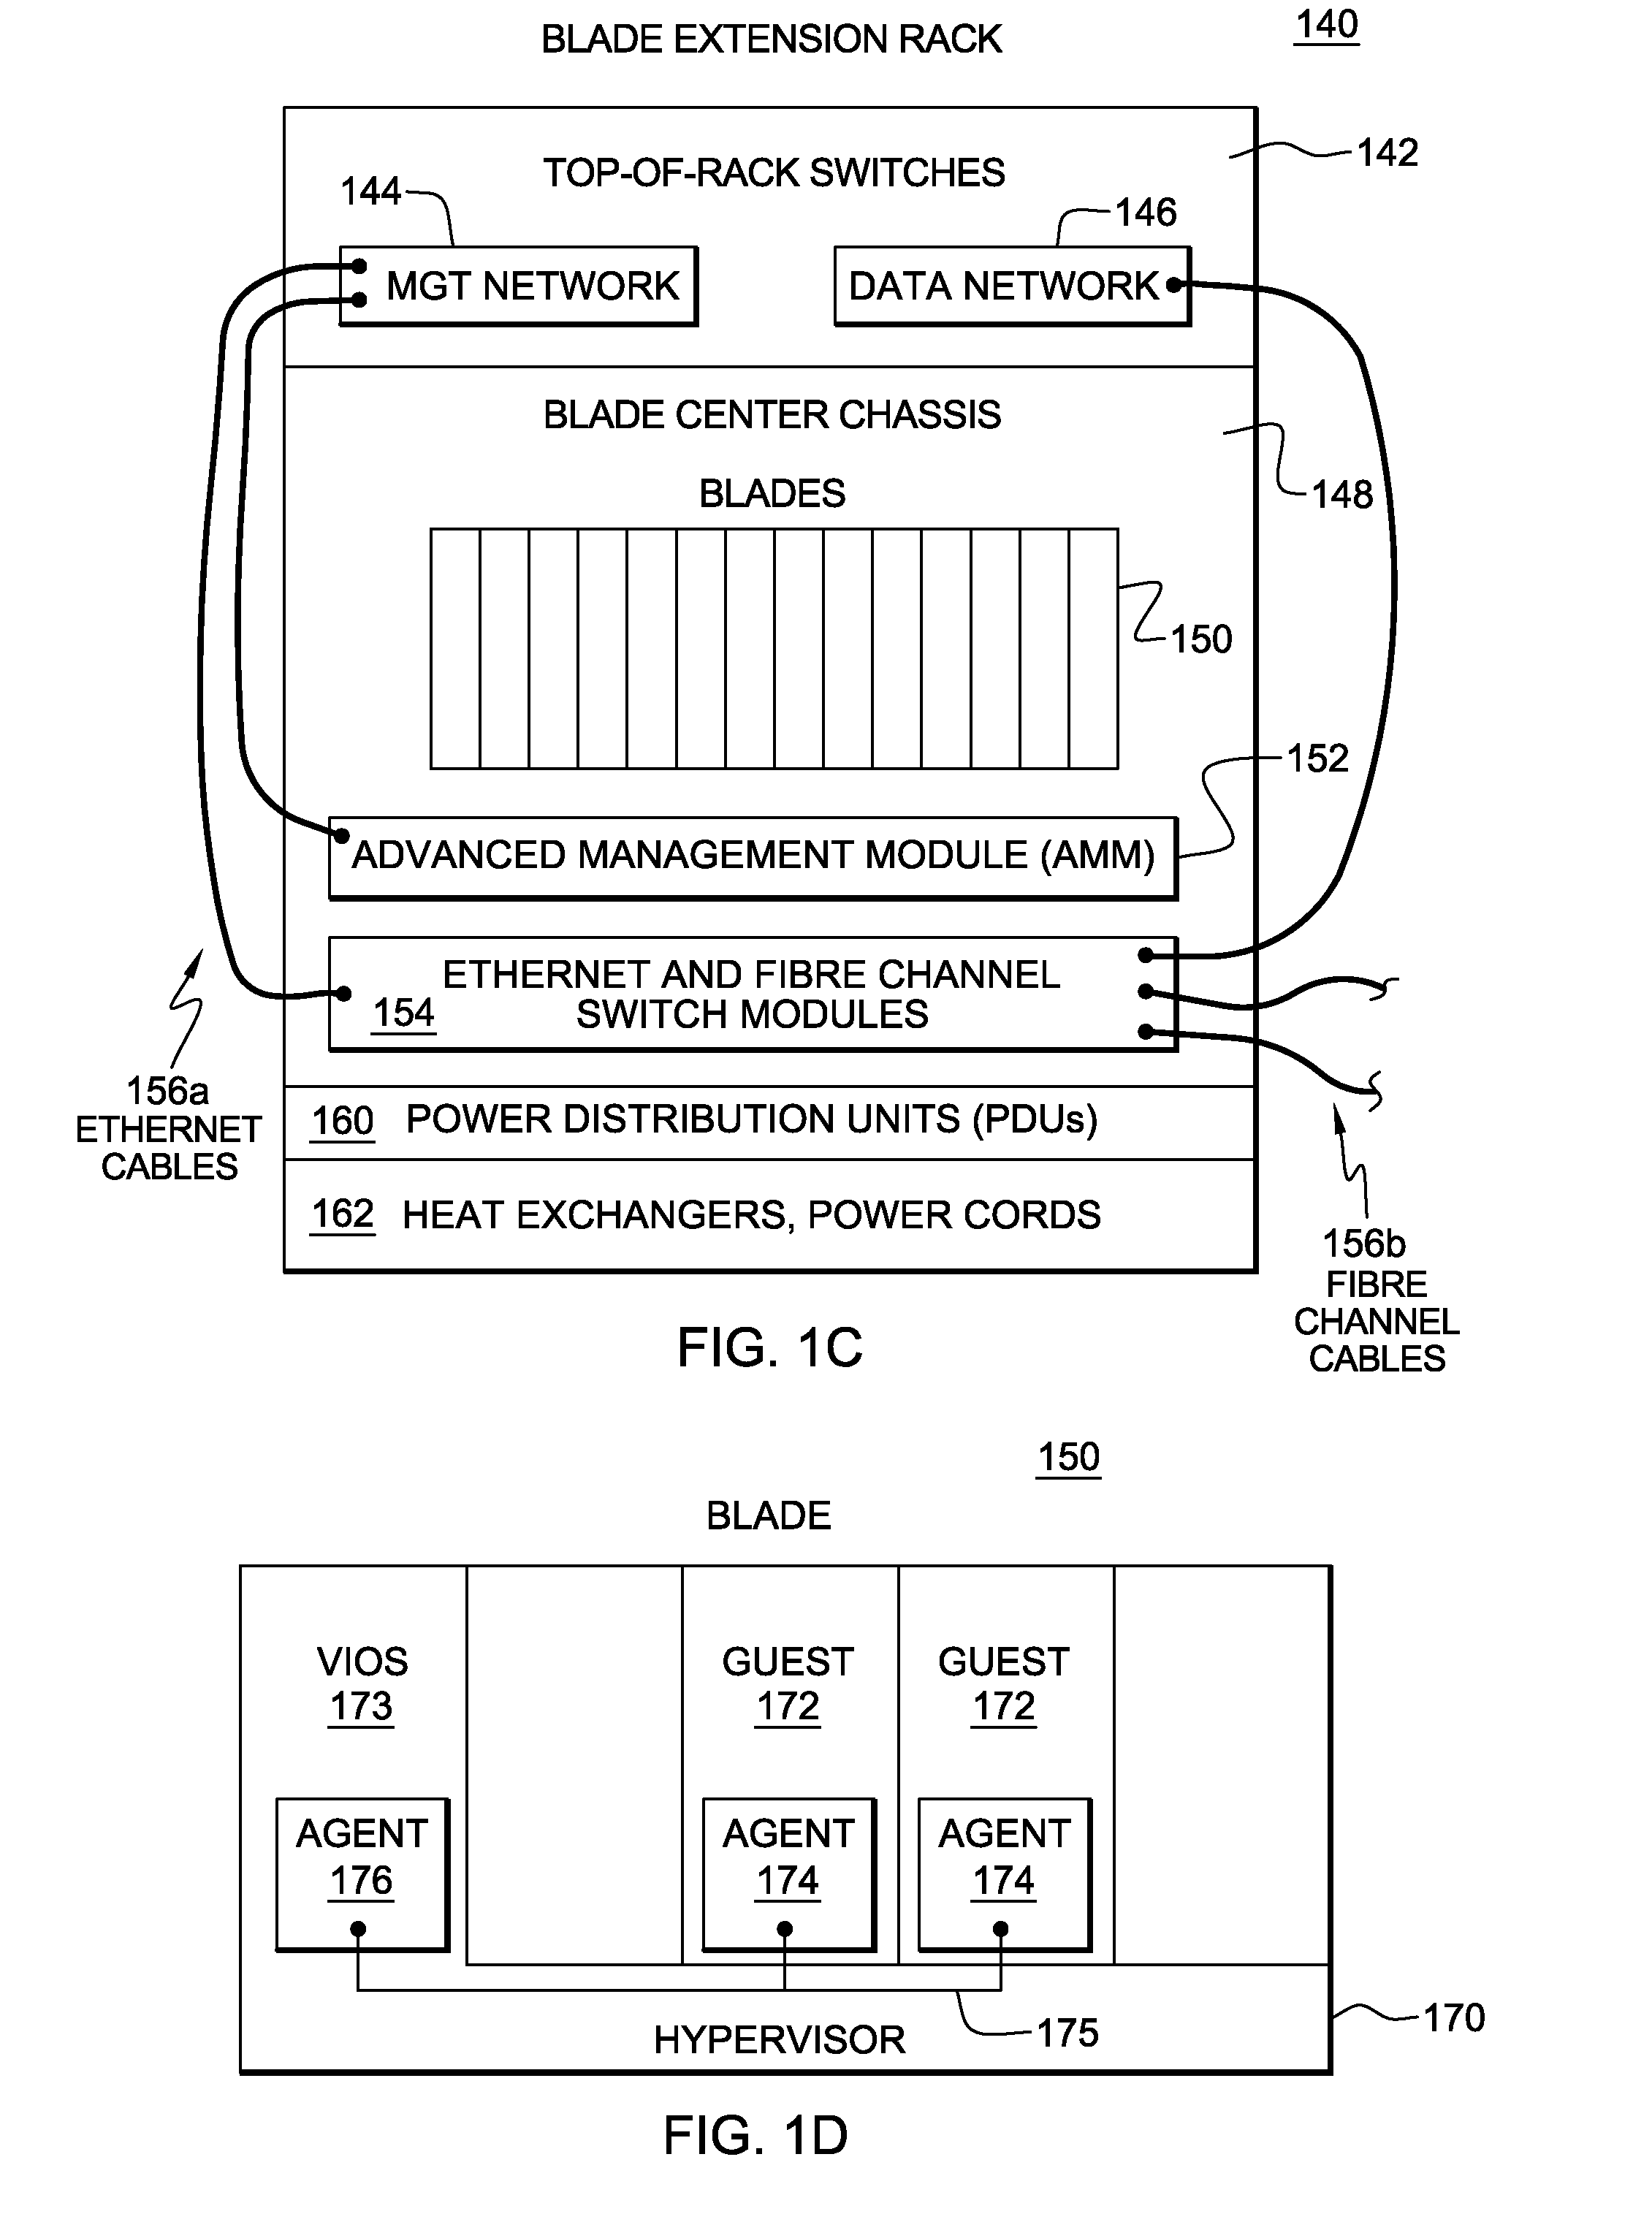 Management of a data network of a computing environment